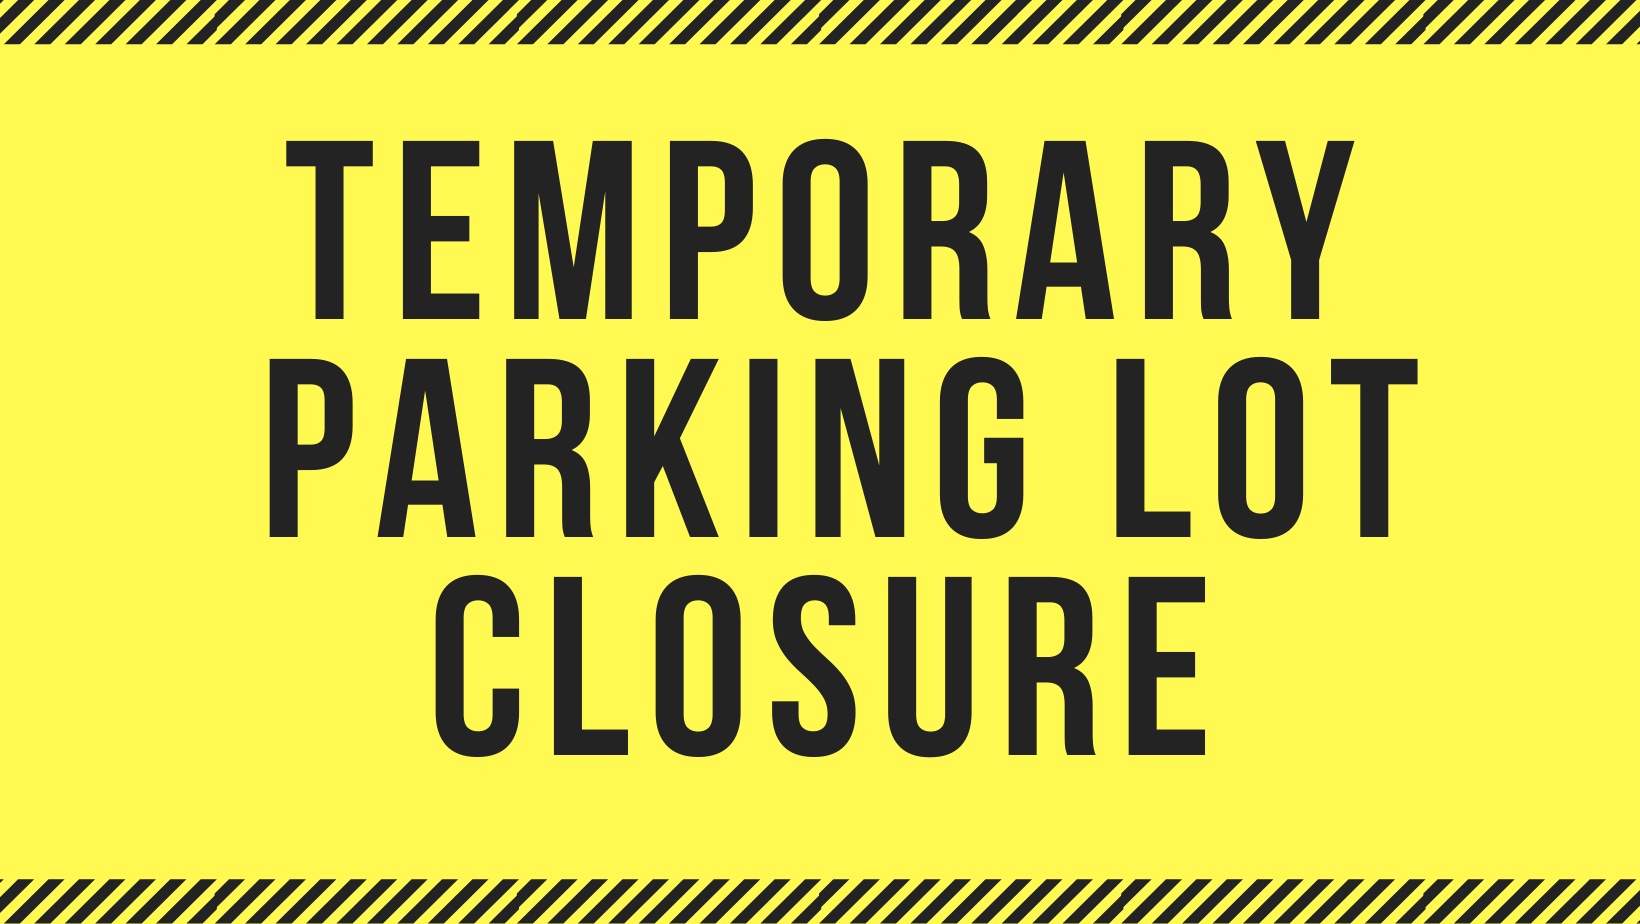 parking lot closed